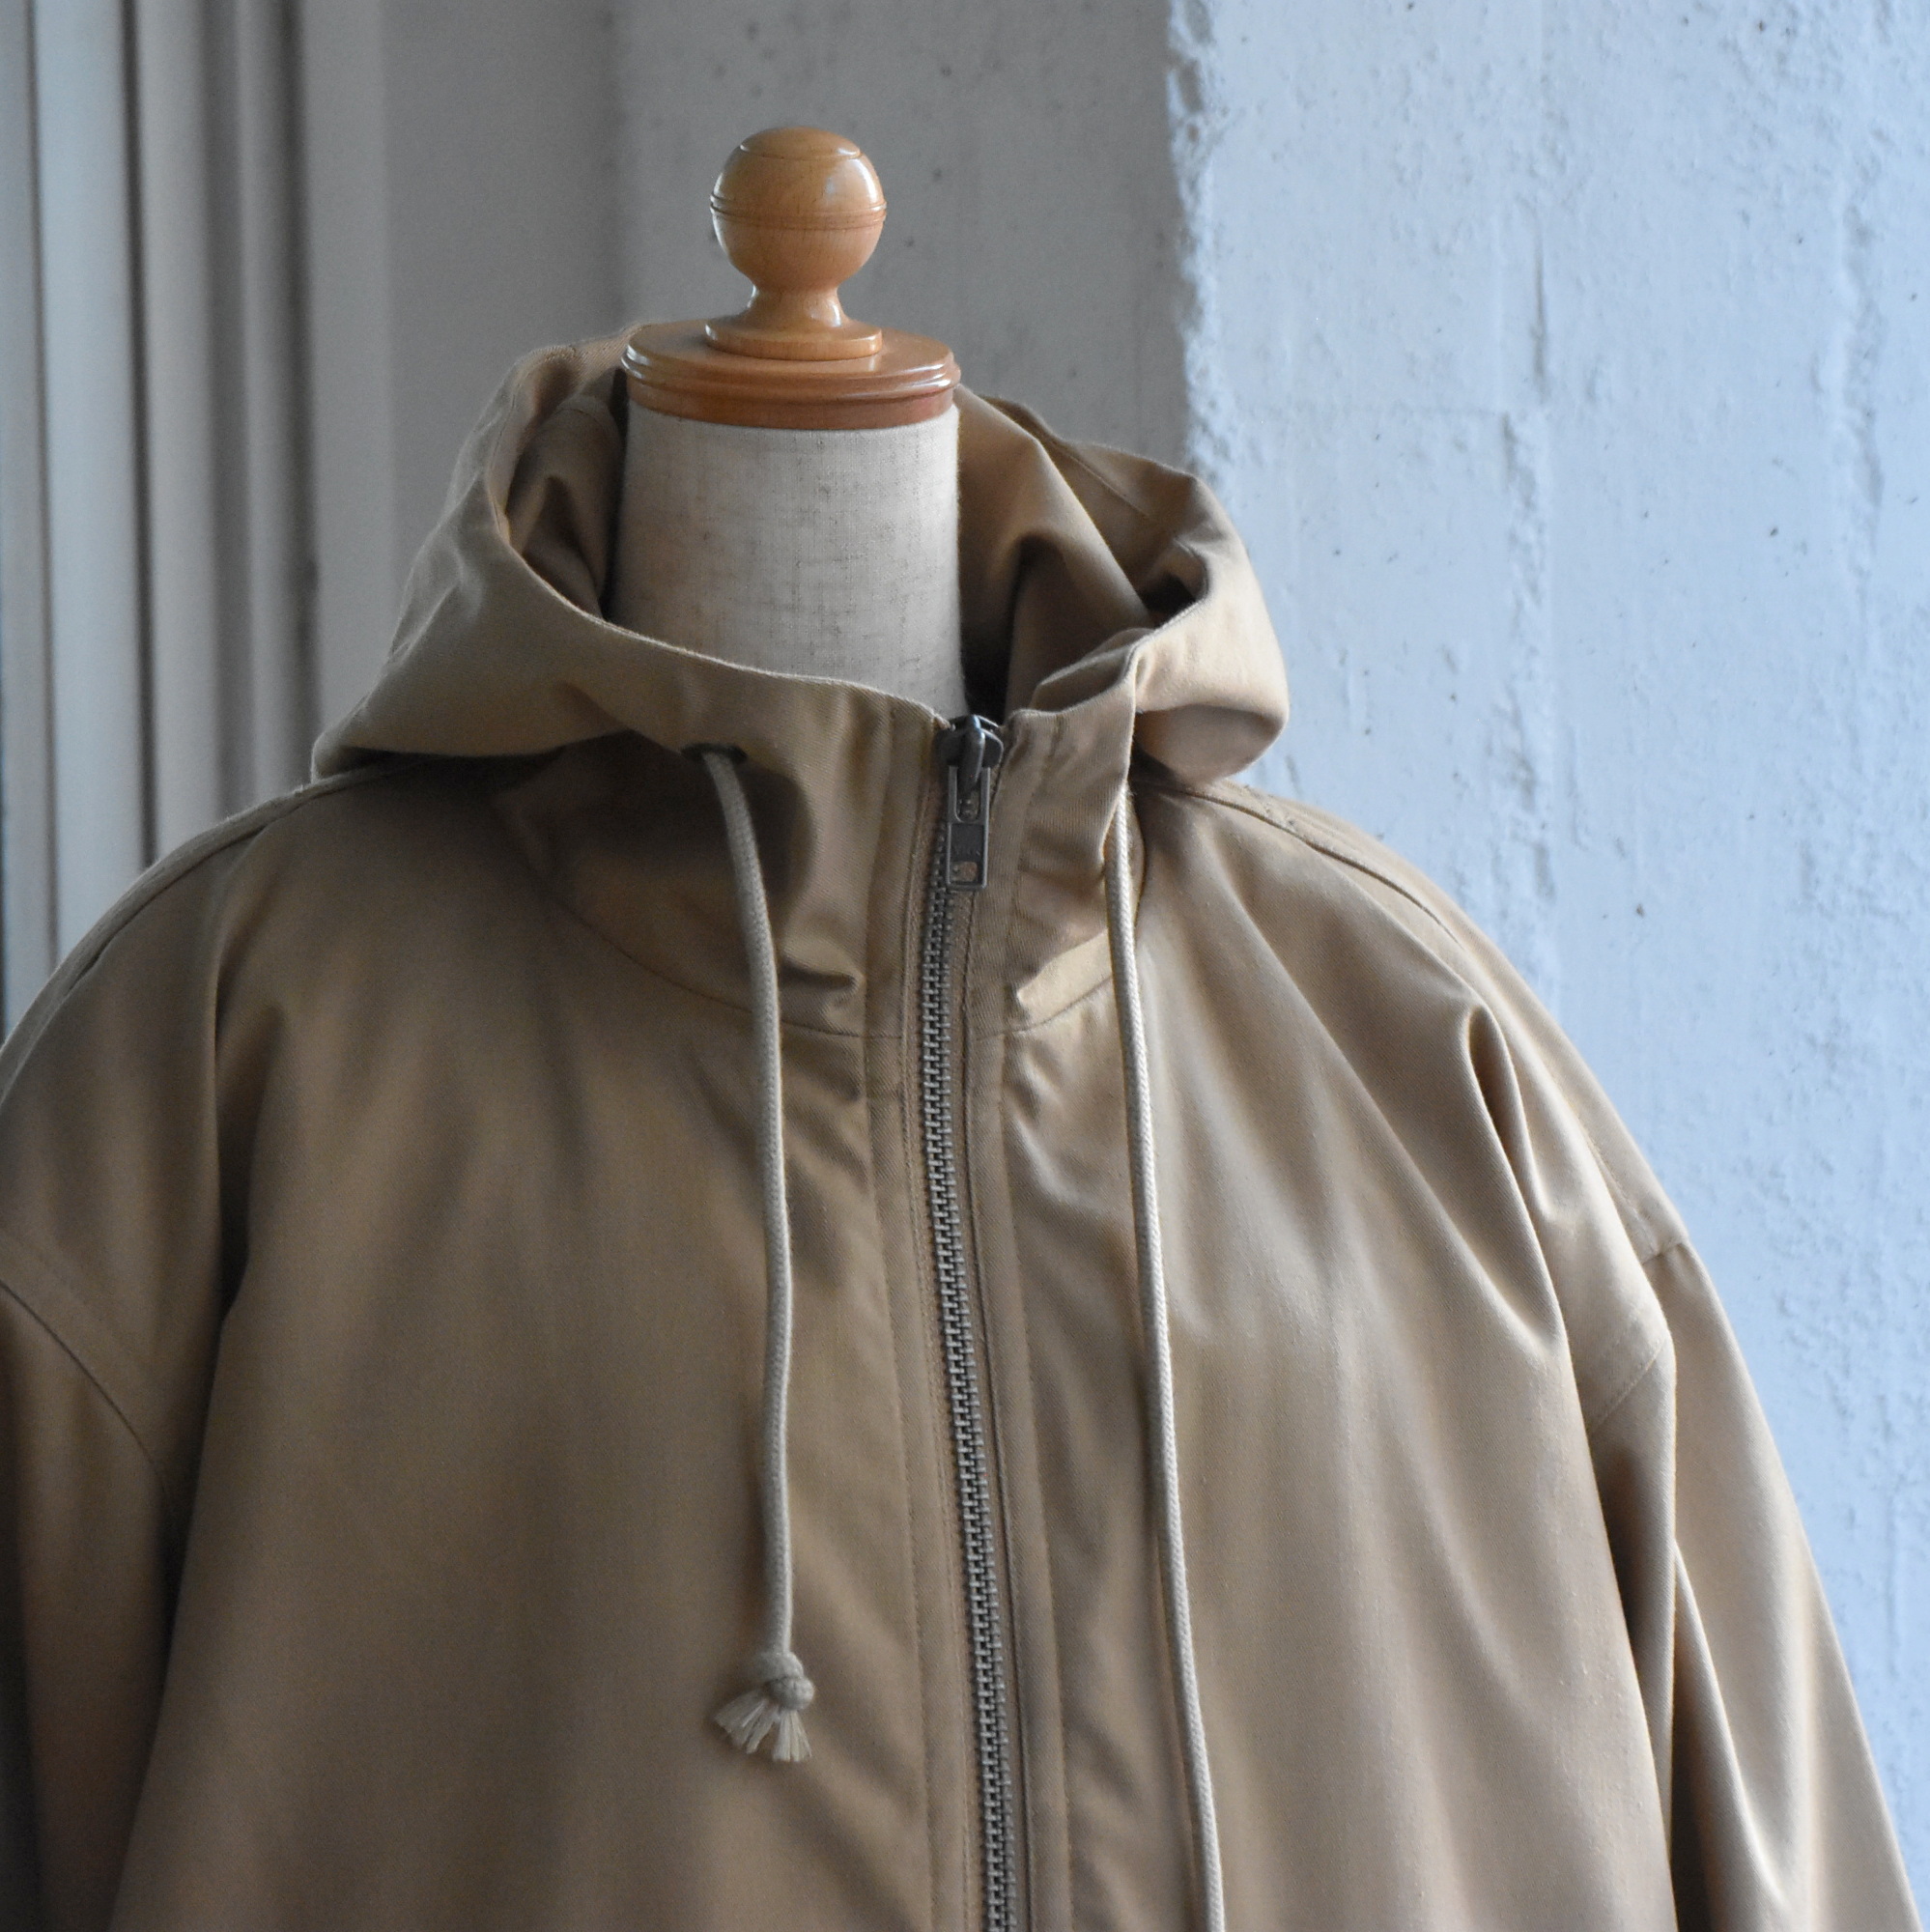 y40% off salezSOFIE D'HOORE(\tB[h[) / Hooded parka with detachable lining #CREED-AA(6)